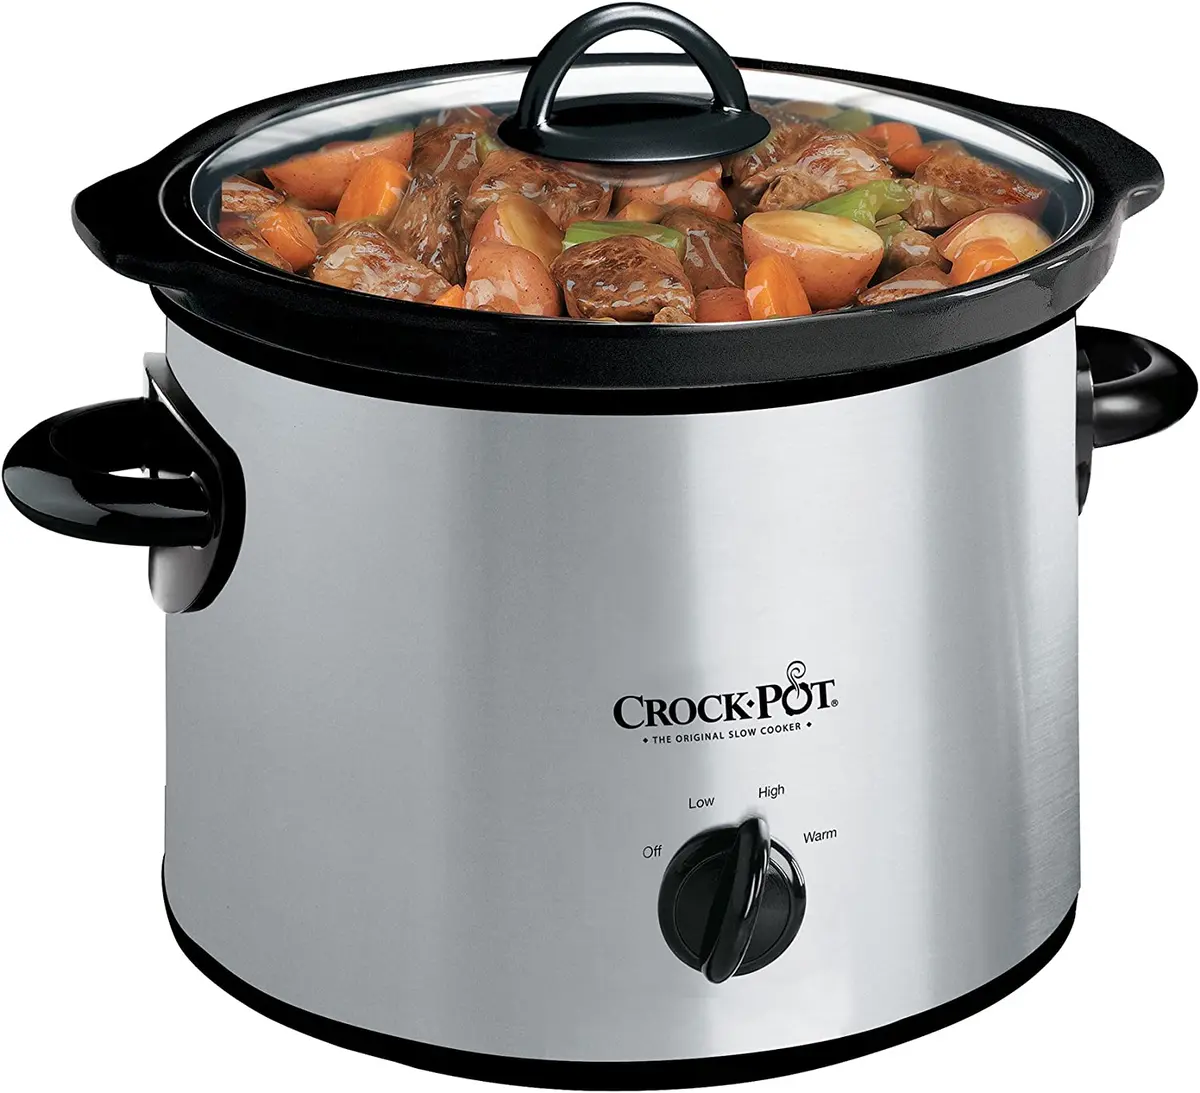 Crock-Pot Small 3 Quart round Manual Slow Cooker, Stainless Steel and Black